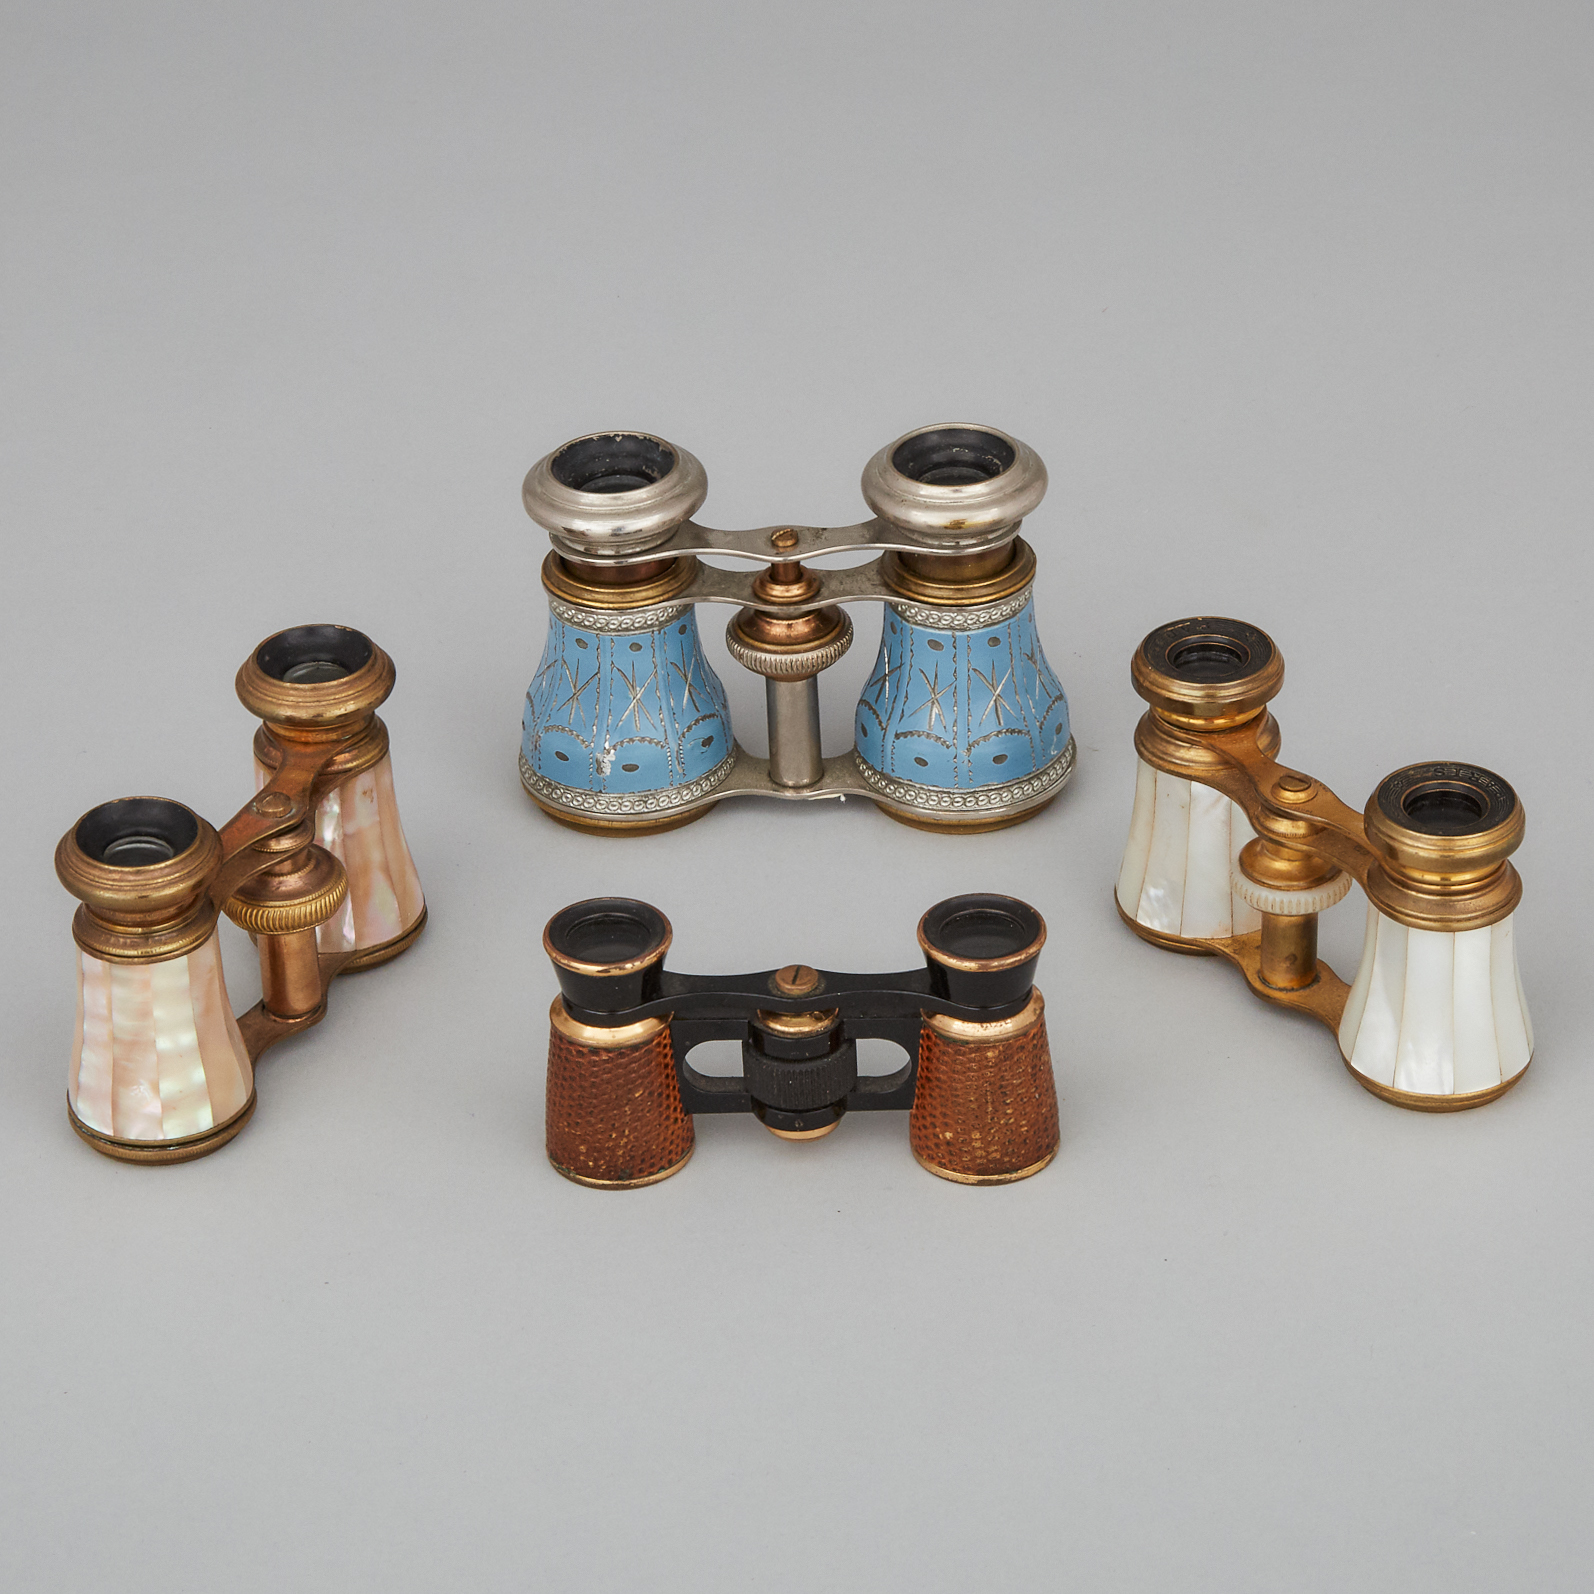 Four Pairs of French Opera Glasses, 19th and 20th centuries